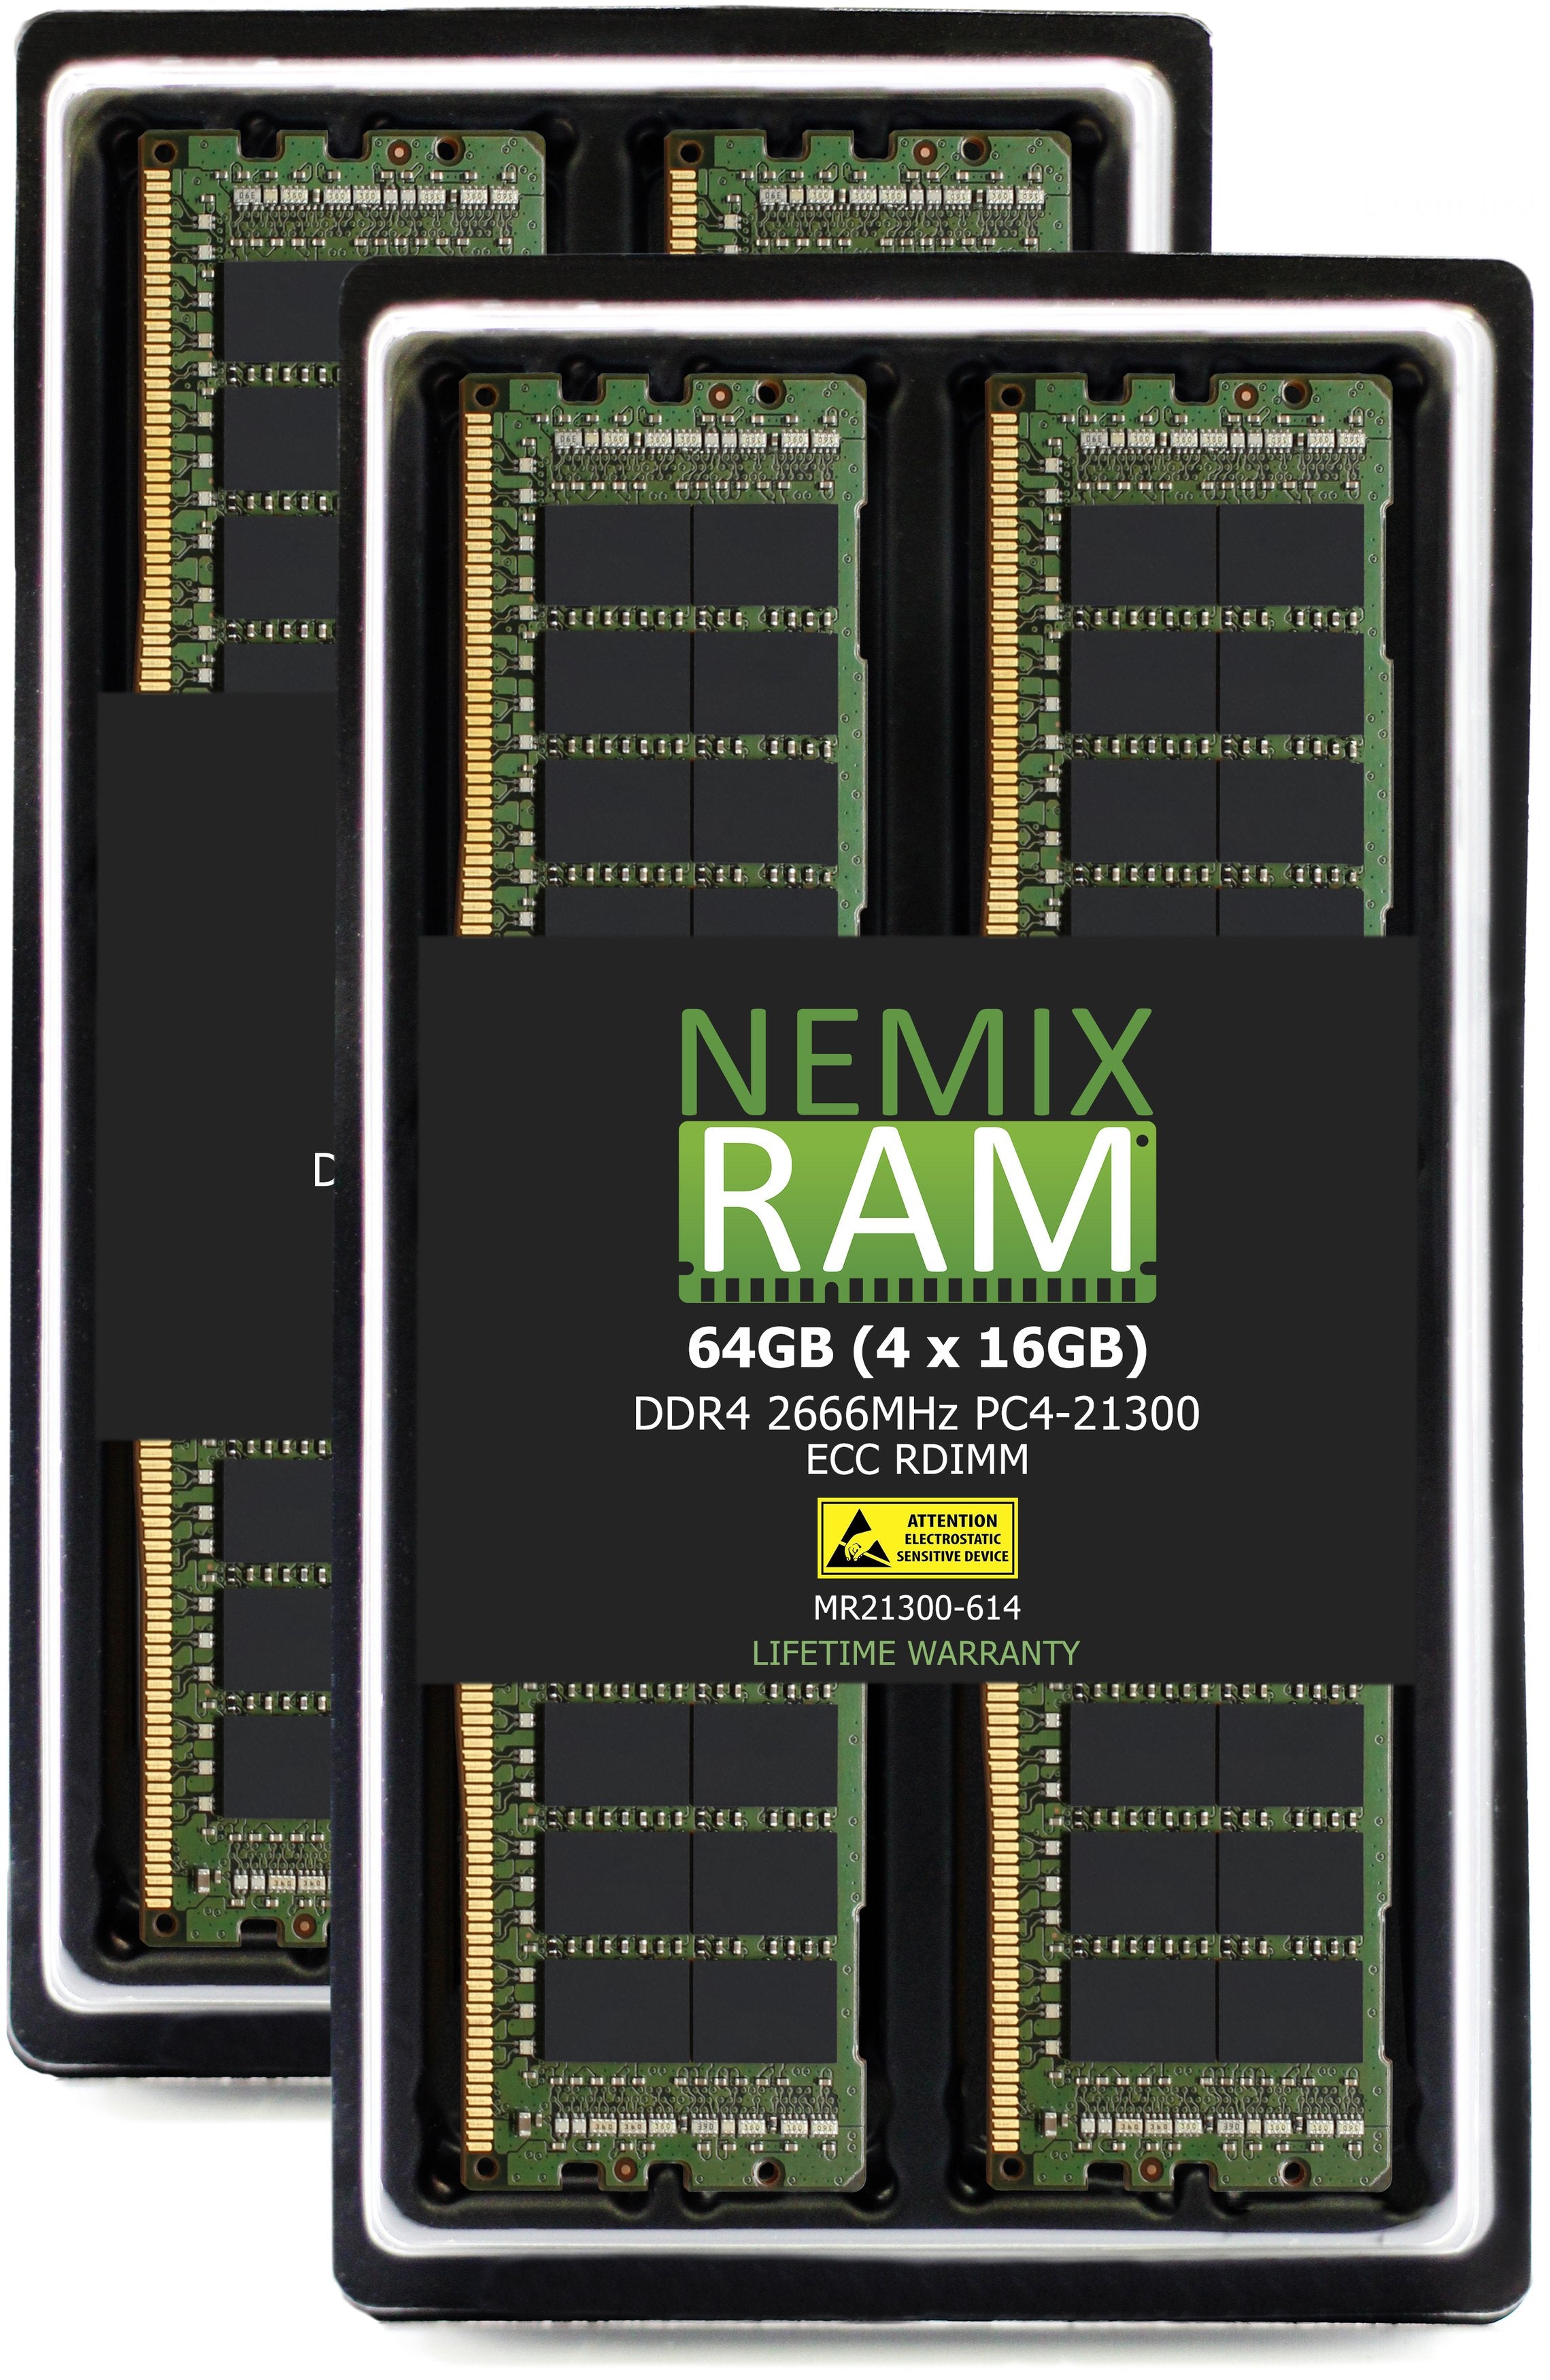 DDR4 2666MHZ PC4-21300 RDIMM Compatible with Synology FlashStation FS3400